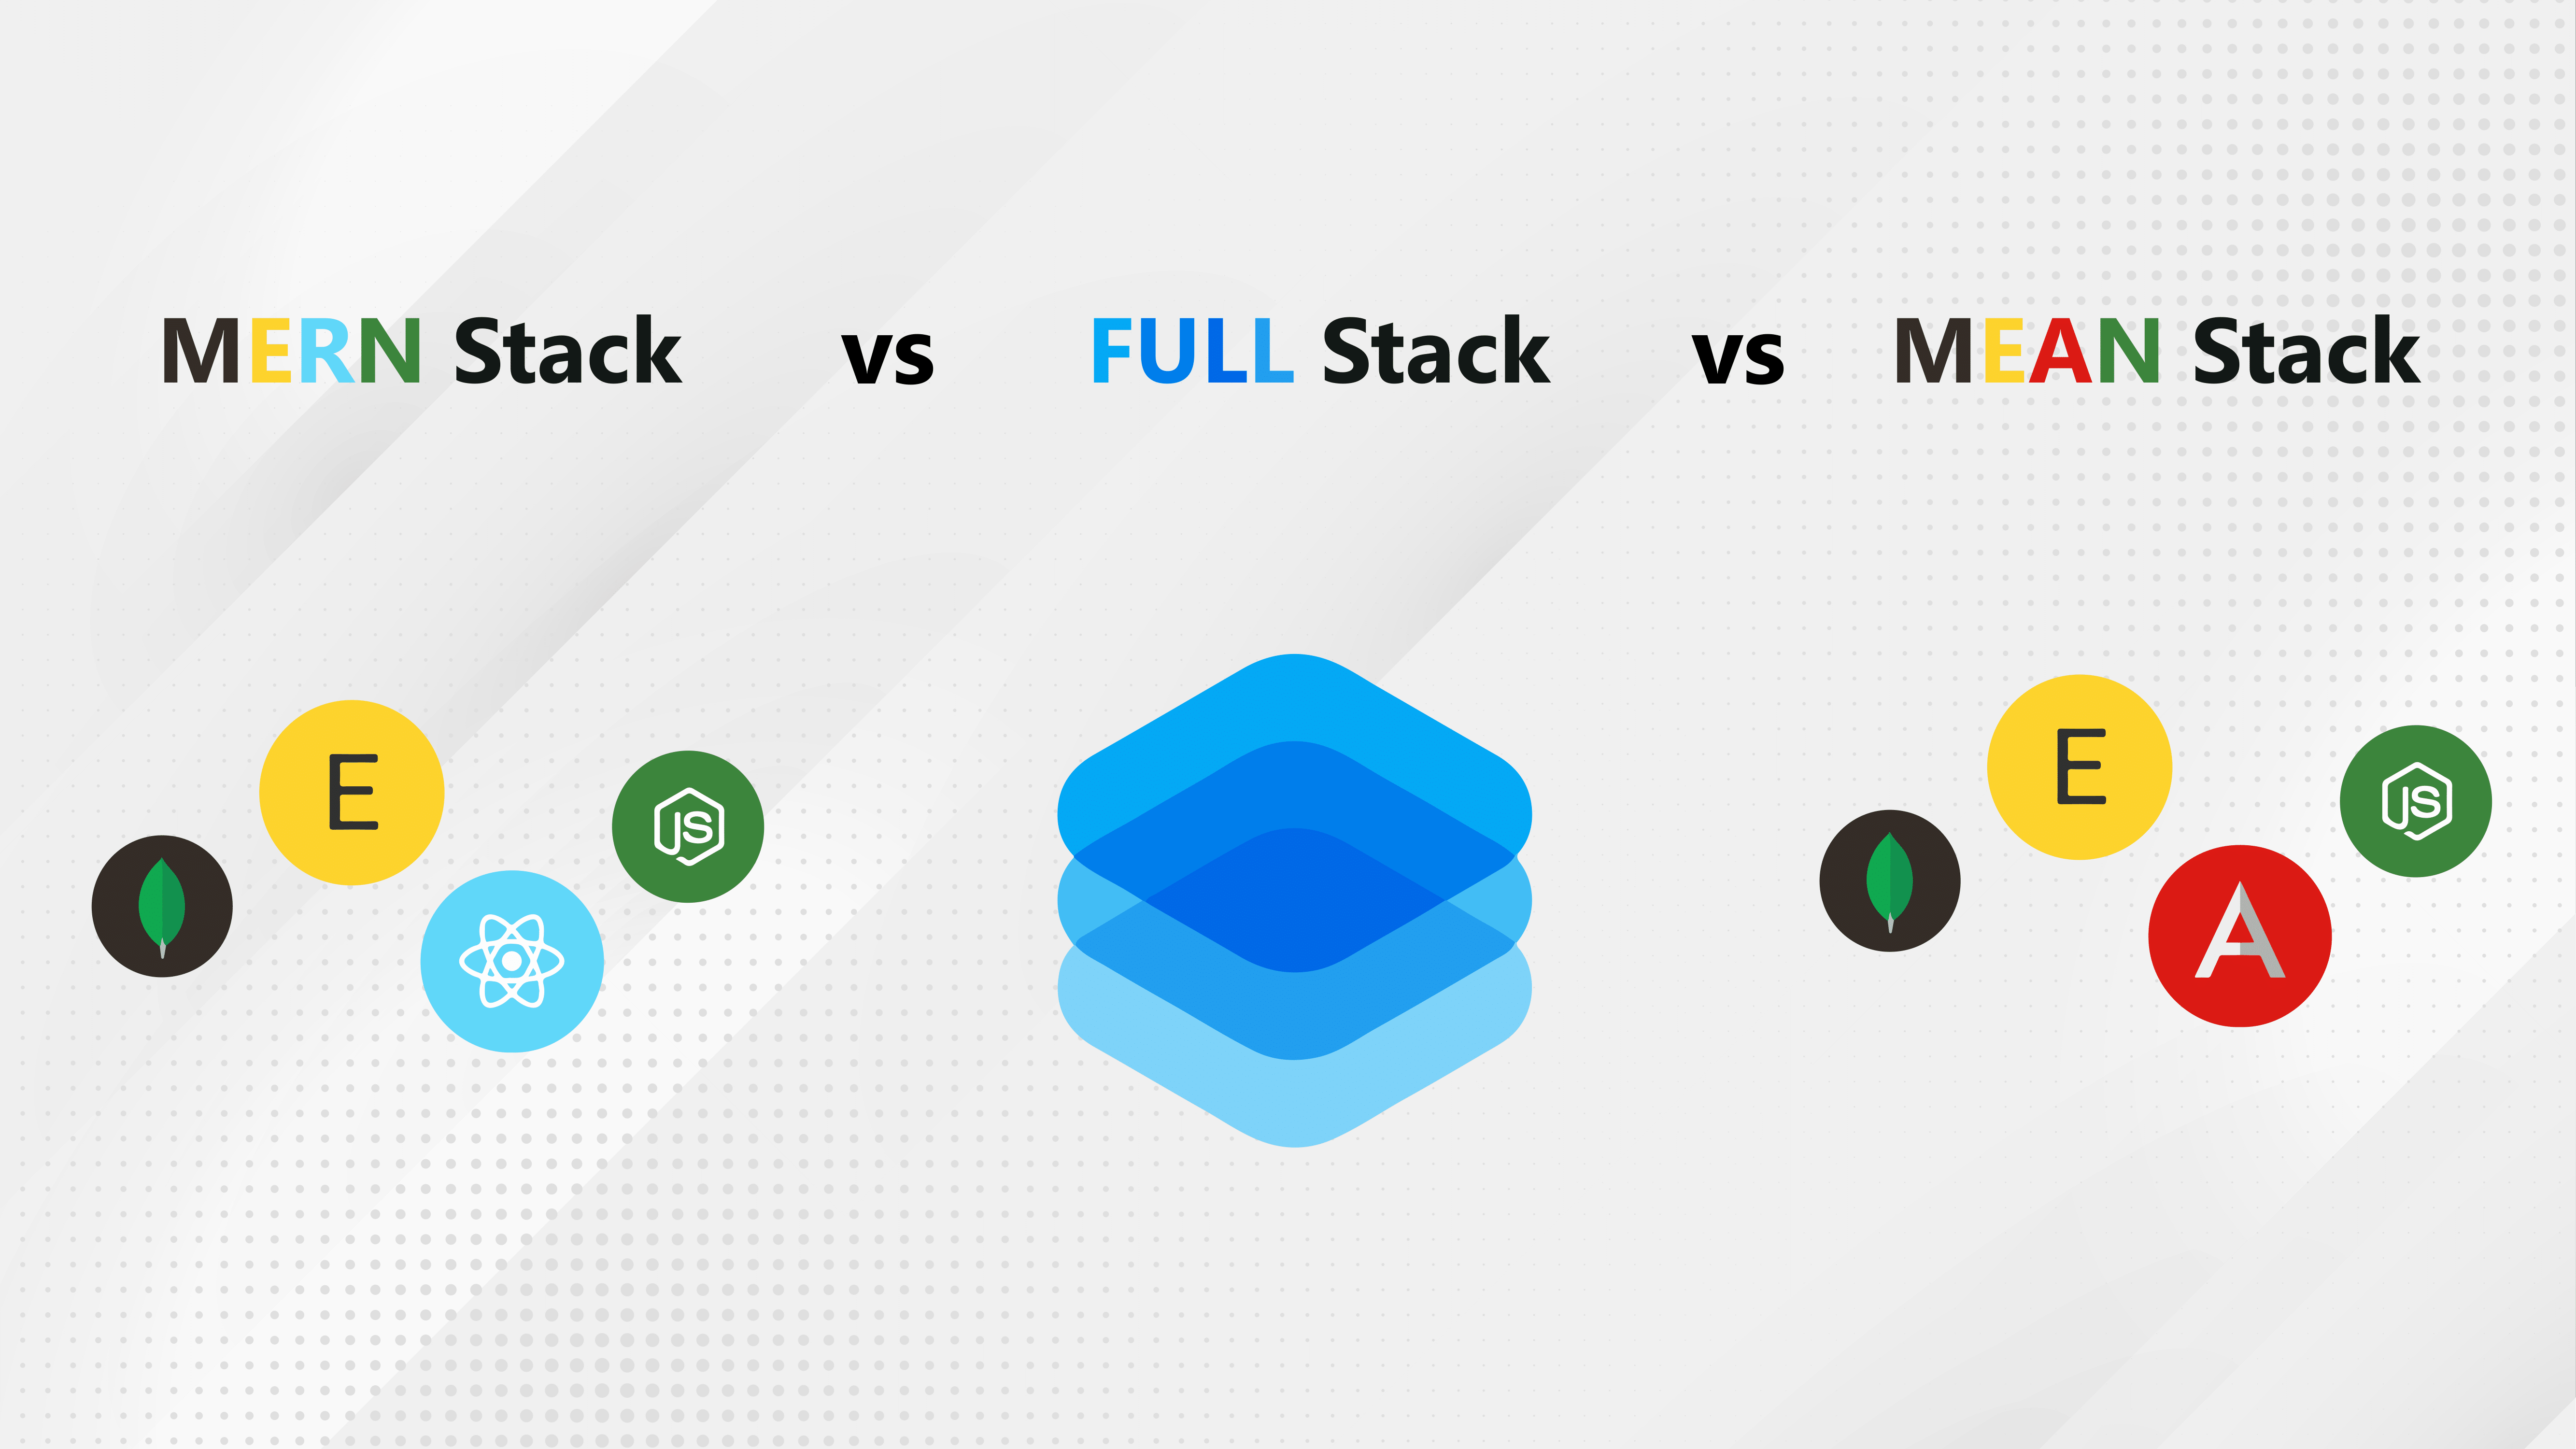 Build a Full-Stack Application with a NoSQL Database